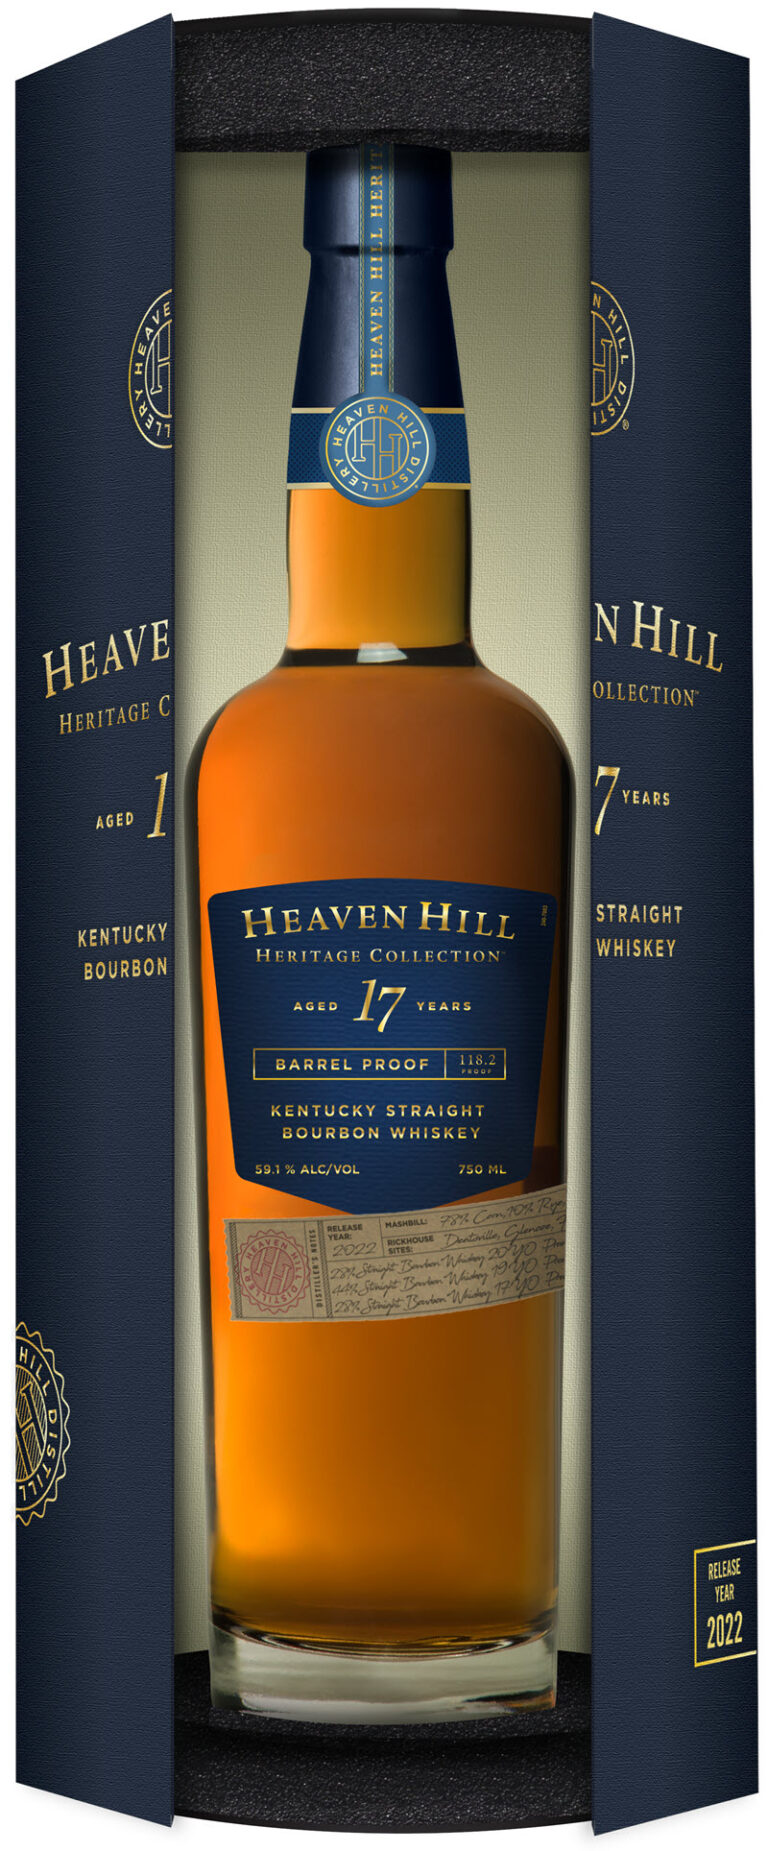 Heaven Hill Distillery Introduces 1st Edition ‘Heaven Hill Heritage